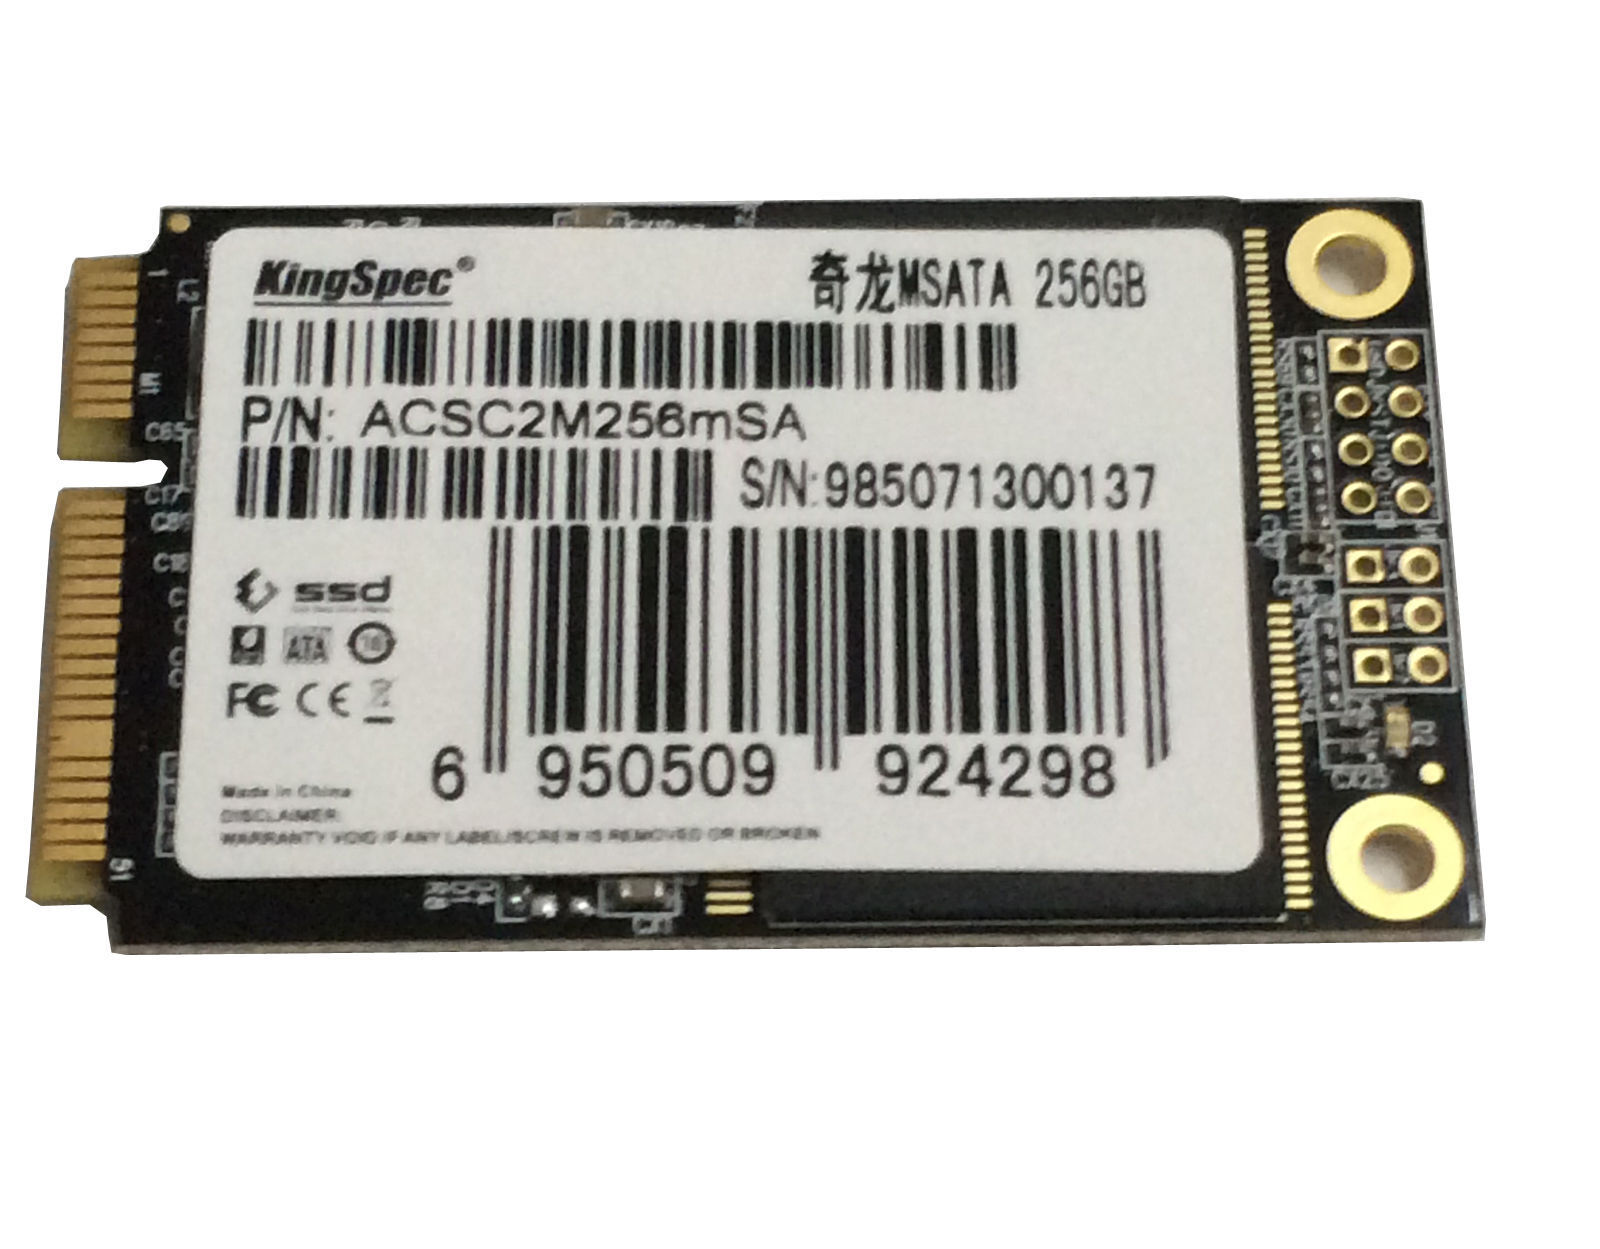 What Is A Mini Card Solid State Drive?